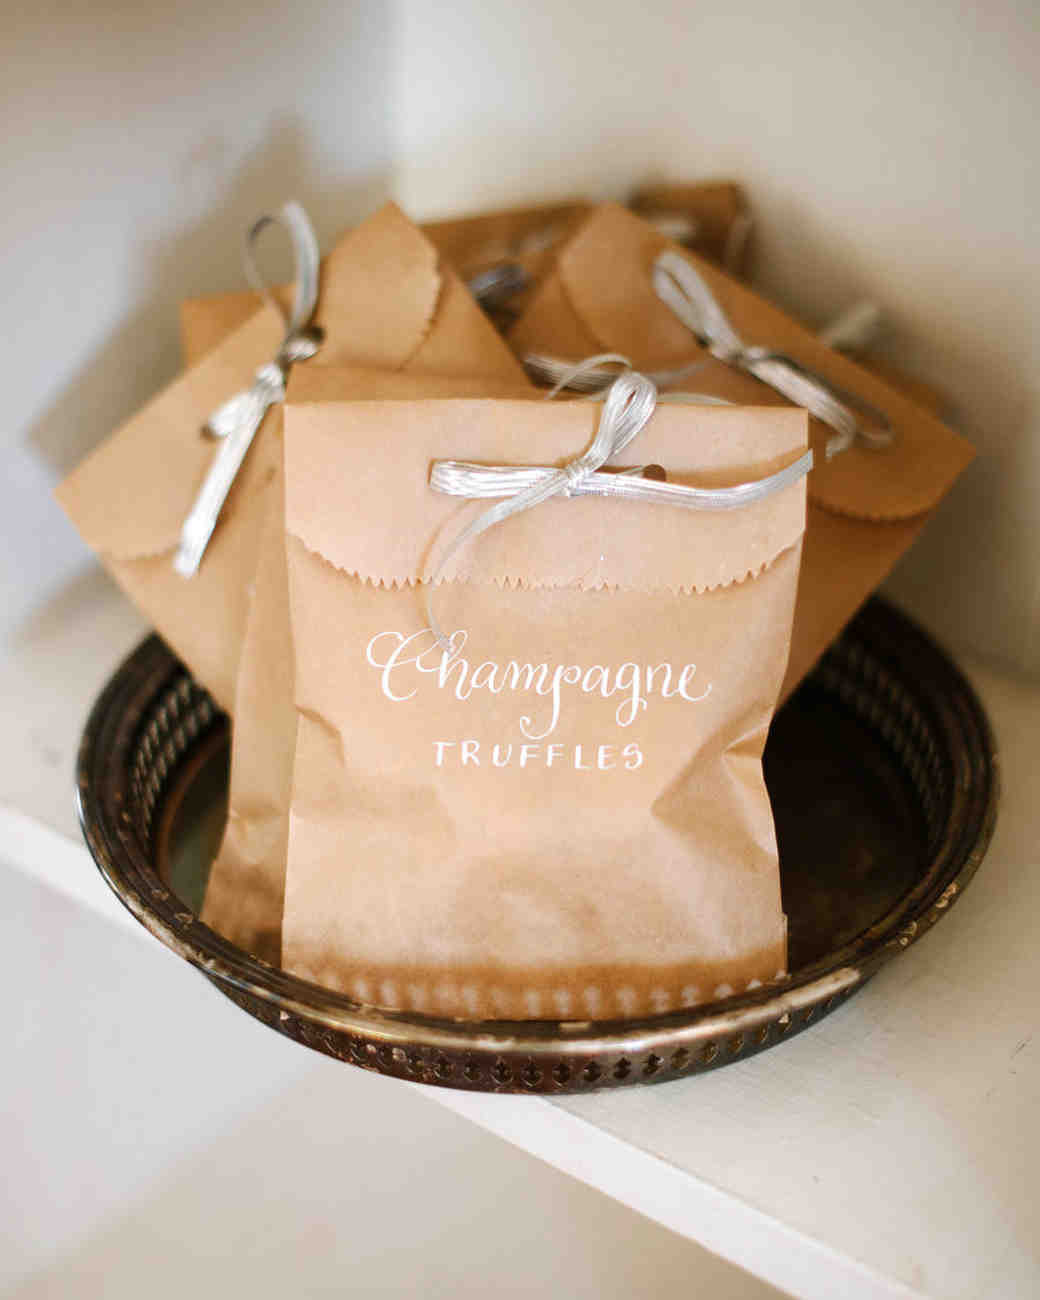 Engagement Party Favors Ideas
 How to Plan the Ultimate Engagement Party